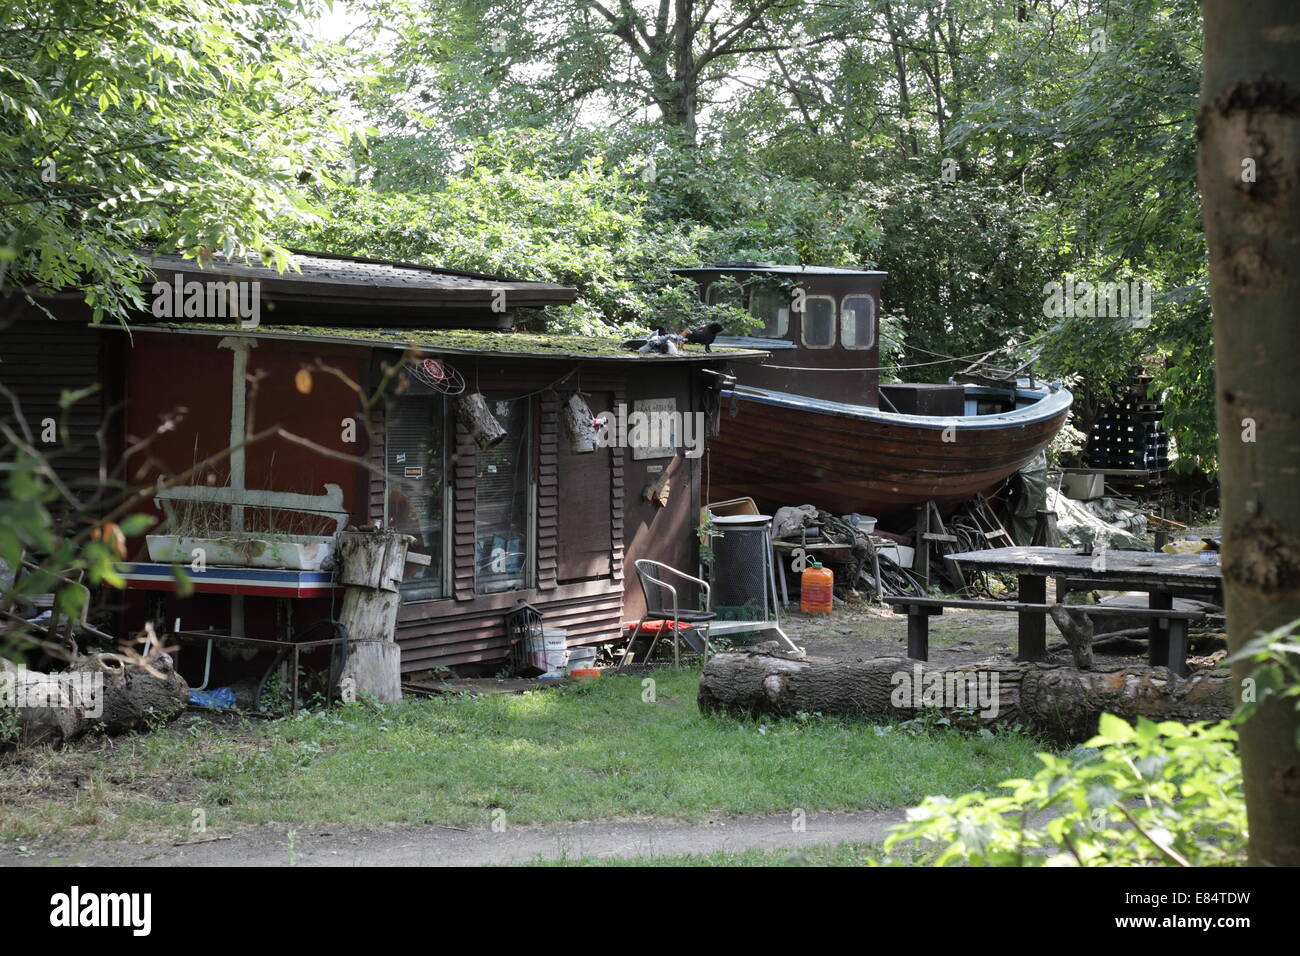 A typical house or shack in Freetown Christiania, Copenhagen, Denmark. Stock Photo